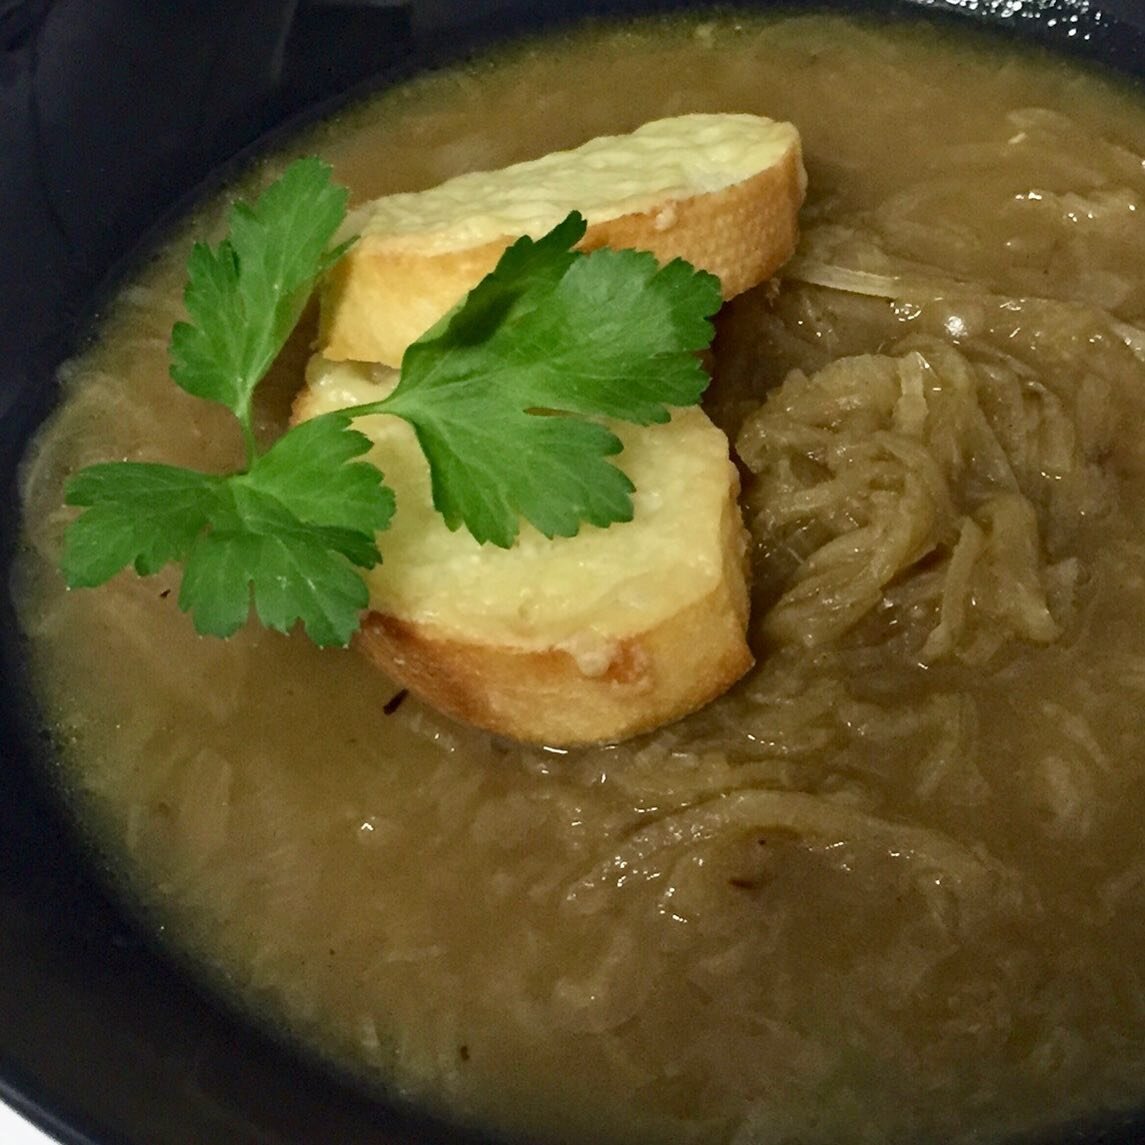 Warm up your Wednesday🌧 
The iconic French Onion Soup is on today 🇫🇷 
.
🗓Reminder for Mornington Peninsula we are heading your way this Friday 25th. 
Email info@croutons.com.au or ph. 9822 2865
All orders need to be in prior to 12pm Thursday 24th